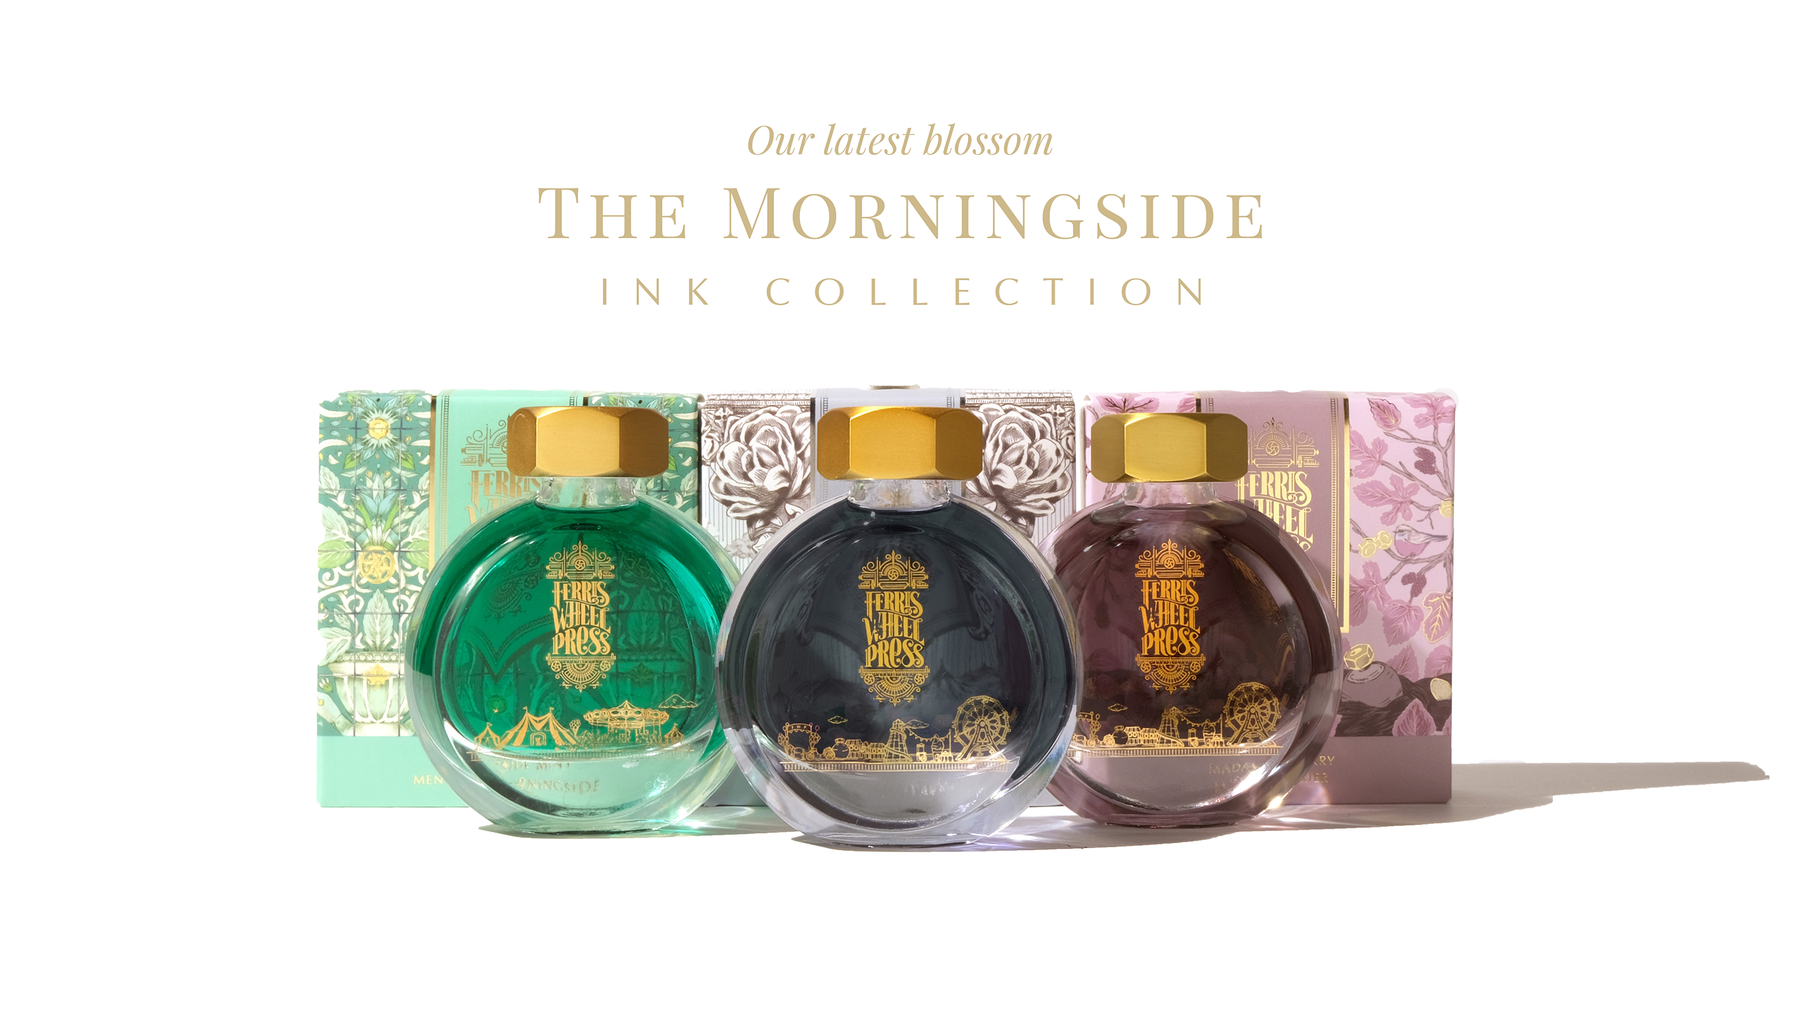 Our Latest Blossom- The Morningside Ink Trio 38ml